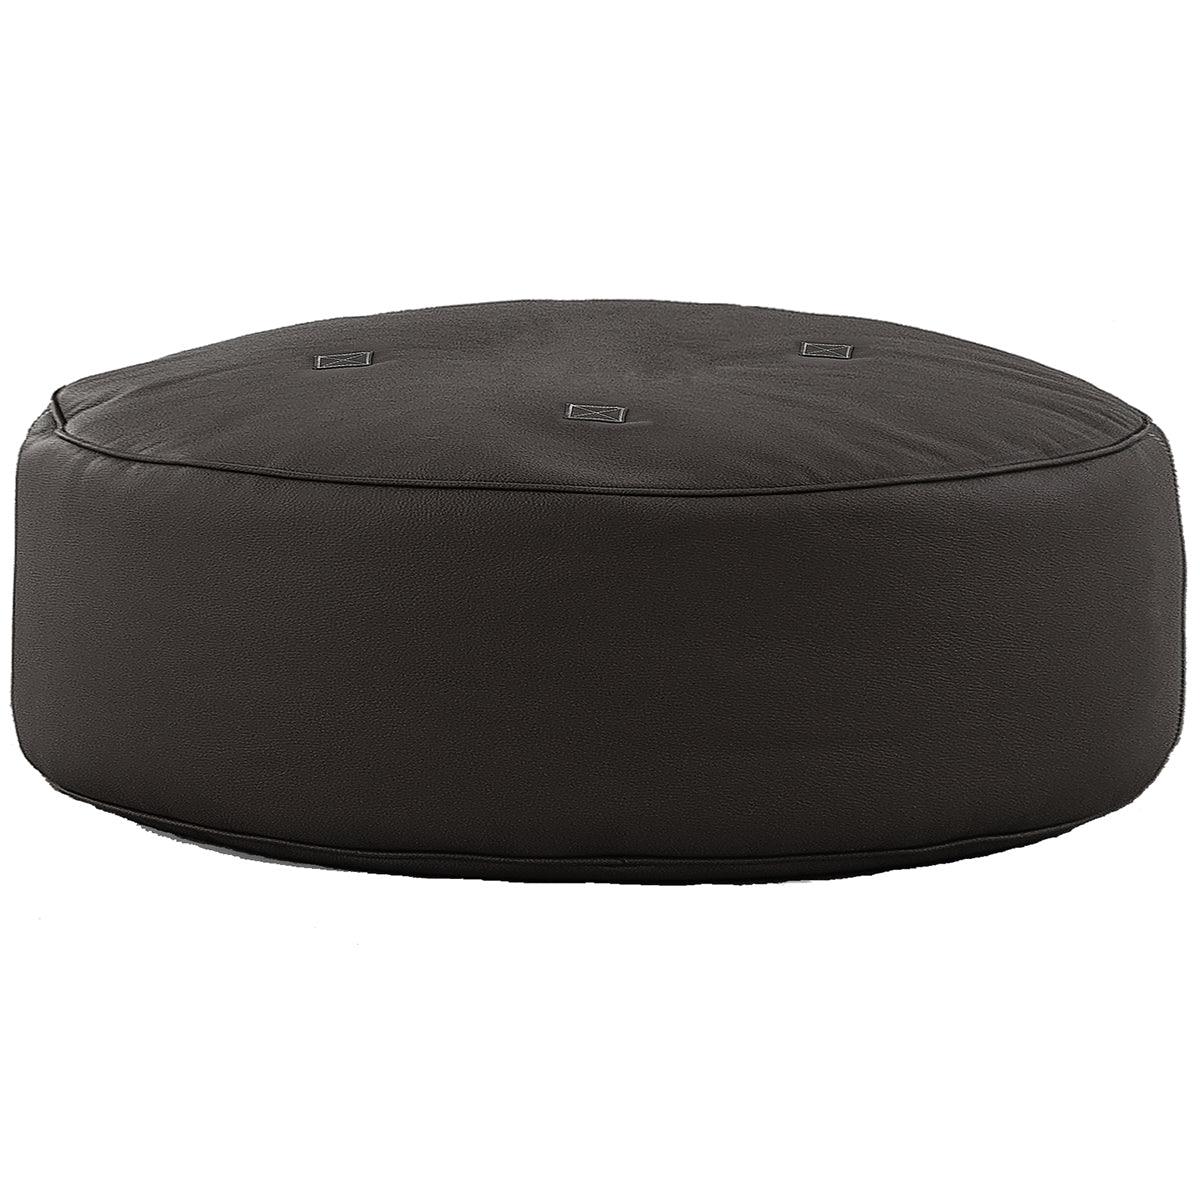 Full Moon Leather Pouf - WOO .Design